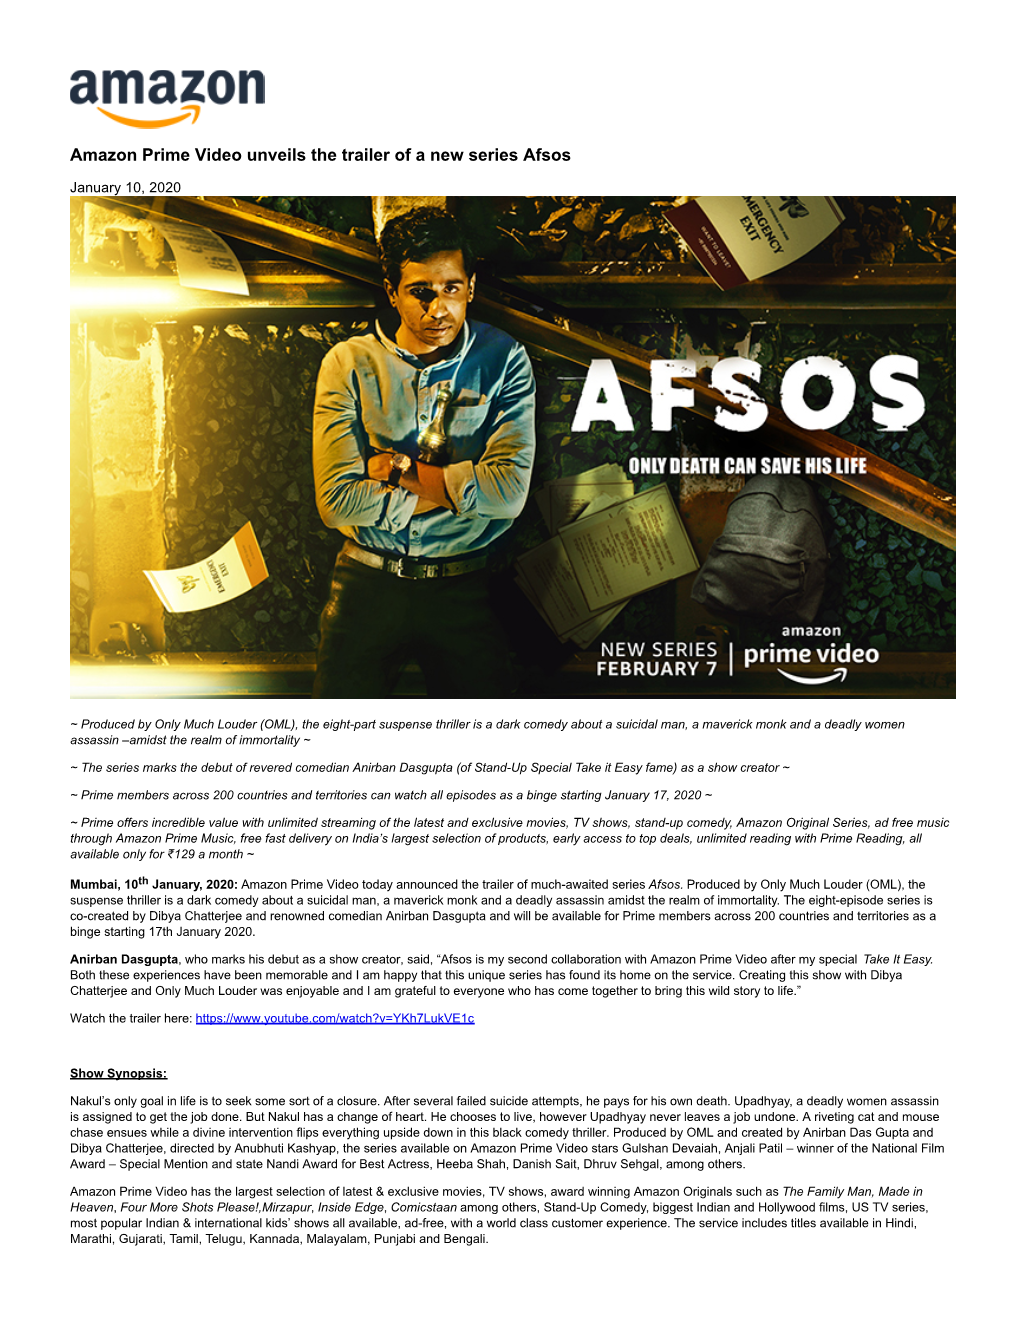 Amazon Prime Video Unveils the Trailer of a New Series Afsos